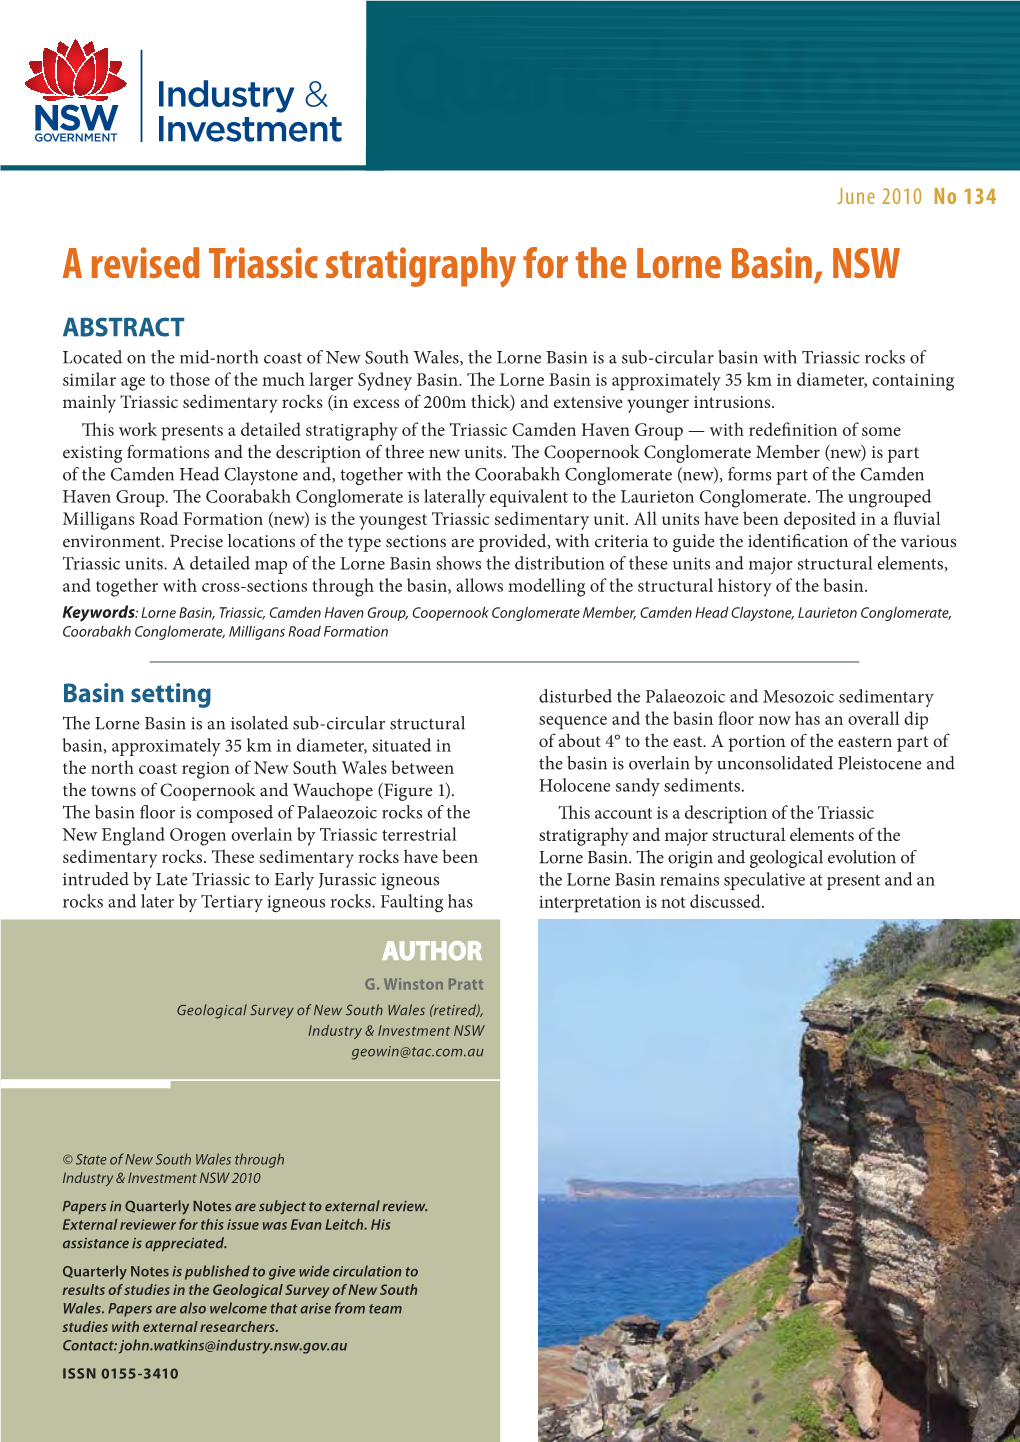 A Revised Triassic Stratigraphy for the Lorne Basin